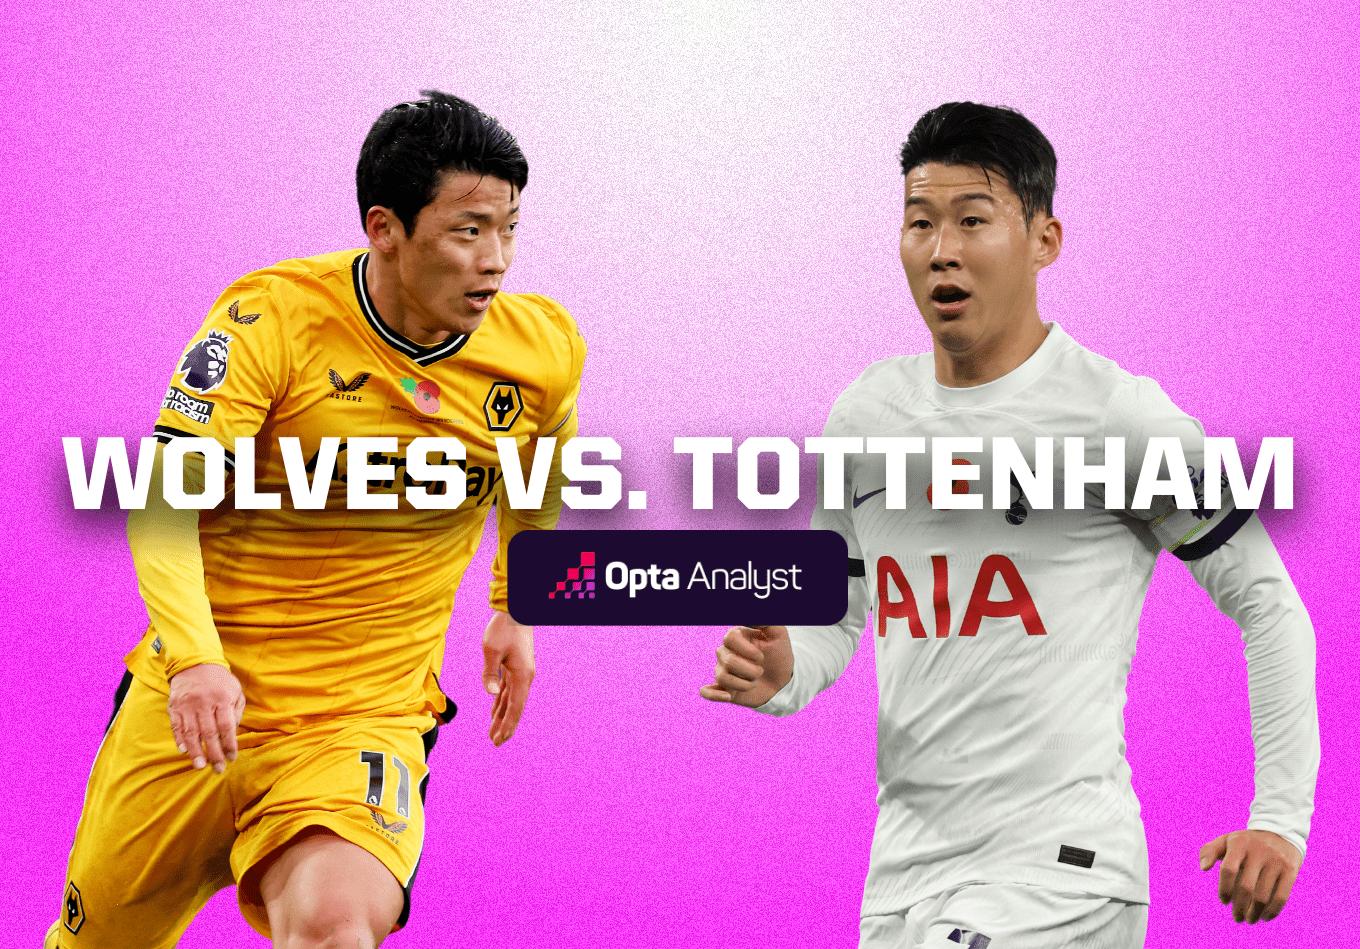 Wolves vs Tottenham: Prediction and Preview